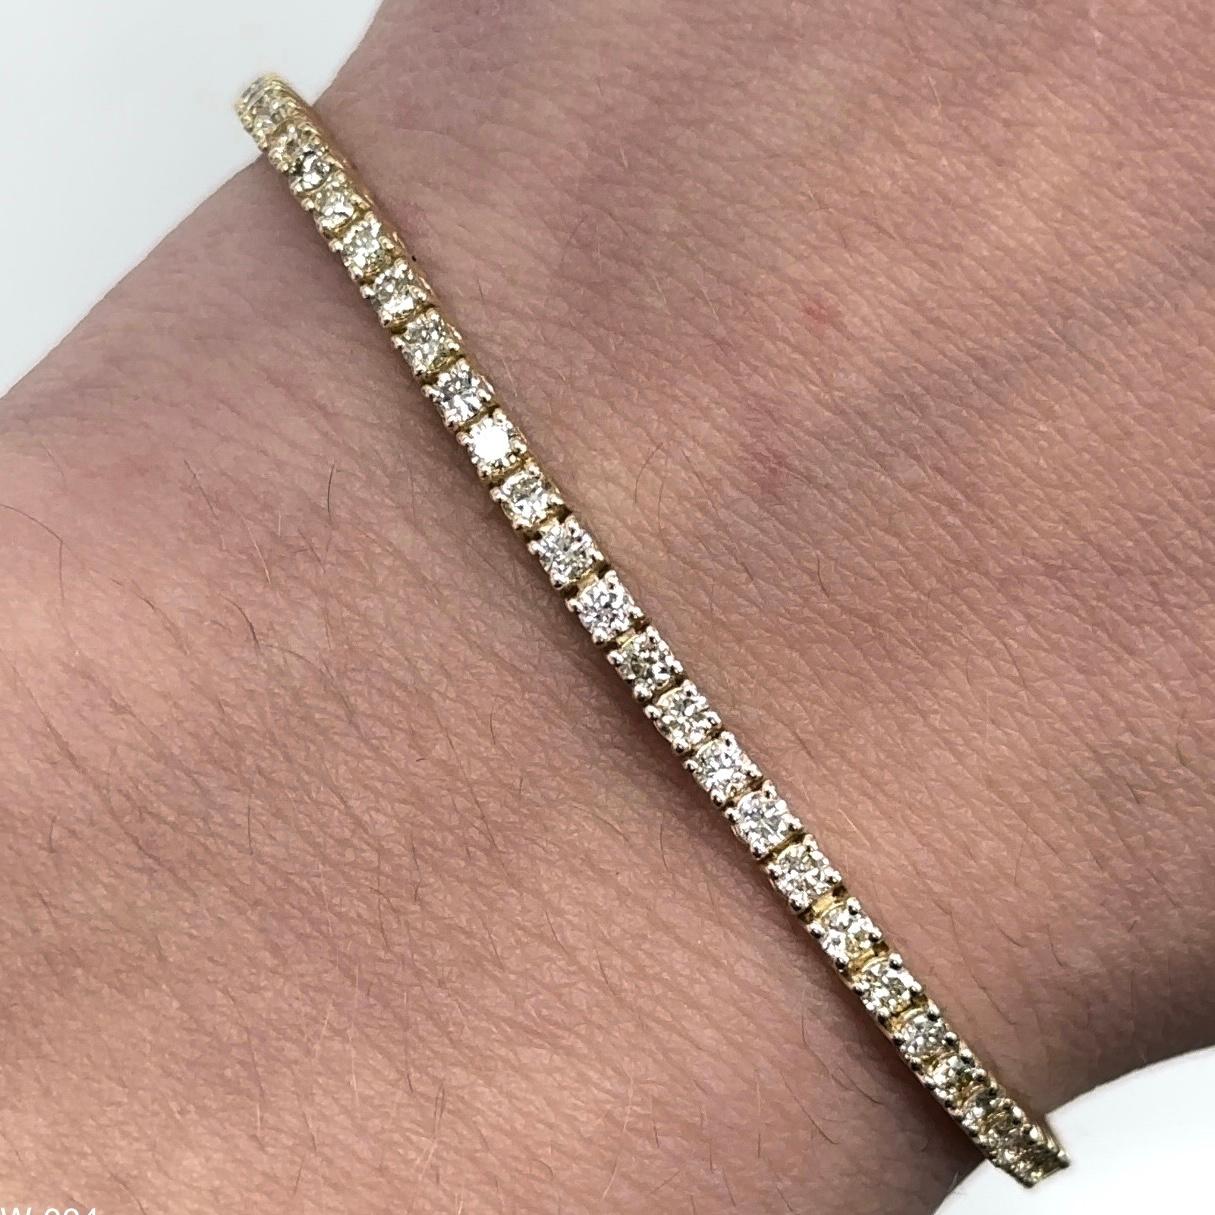 Exquisite and timeless diamonds tennis bracelet, by Alexander Beverly Hills.
90 round brilliant diamonds, 1.28 carats total. Approximately J-L color and SI clarity. Four prong set in 18k yellow gold, 6.19 grams, 7 inches. 
Accommodated with an